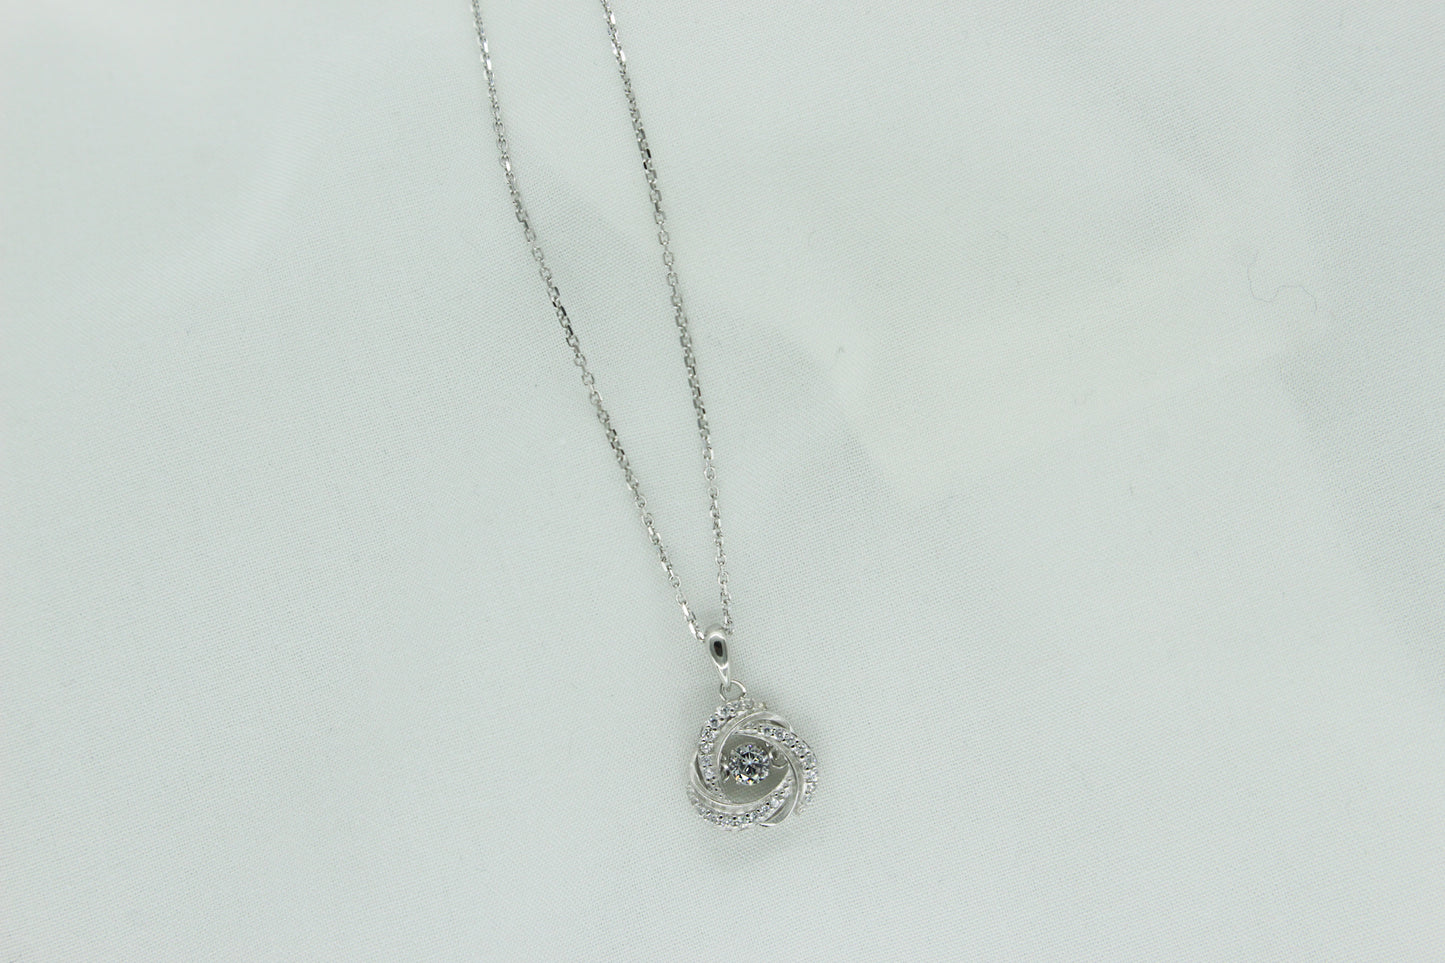 Floating Crystal Love Knot Necklace in Sterling Silver